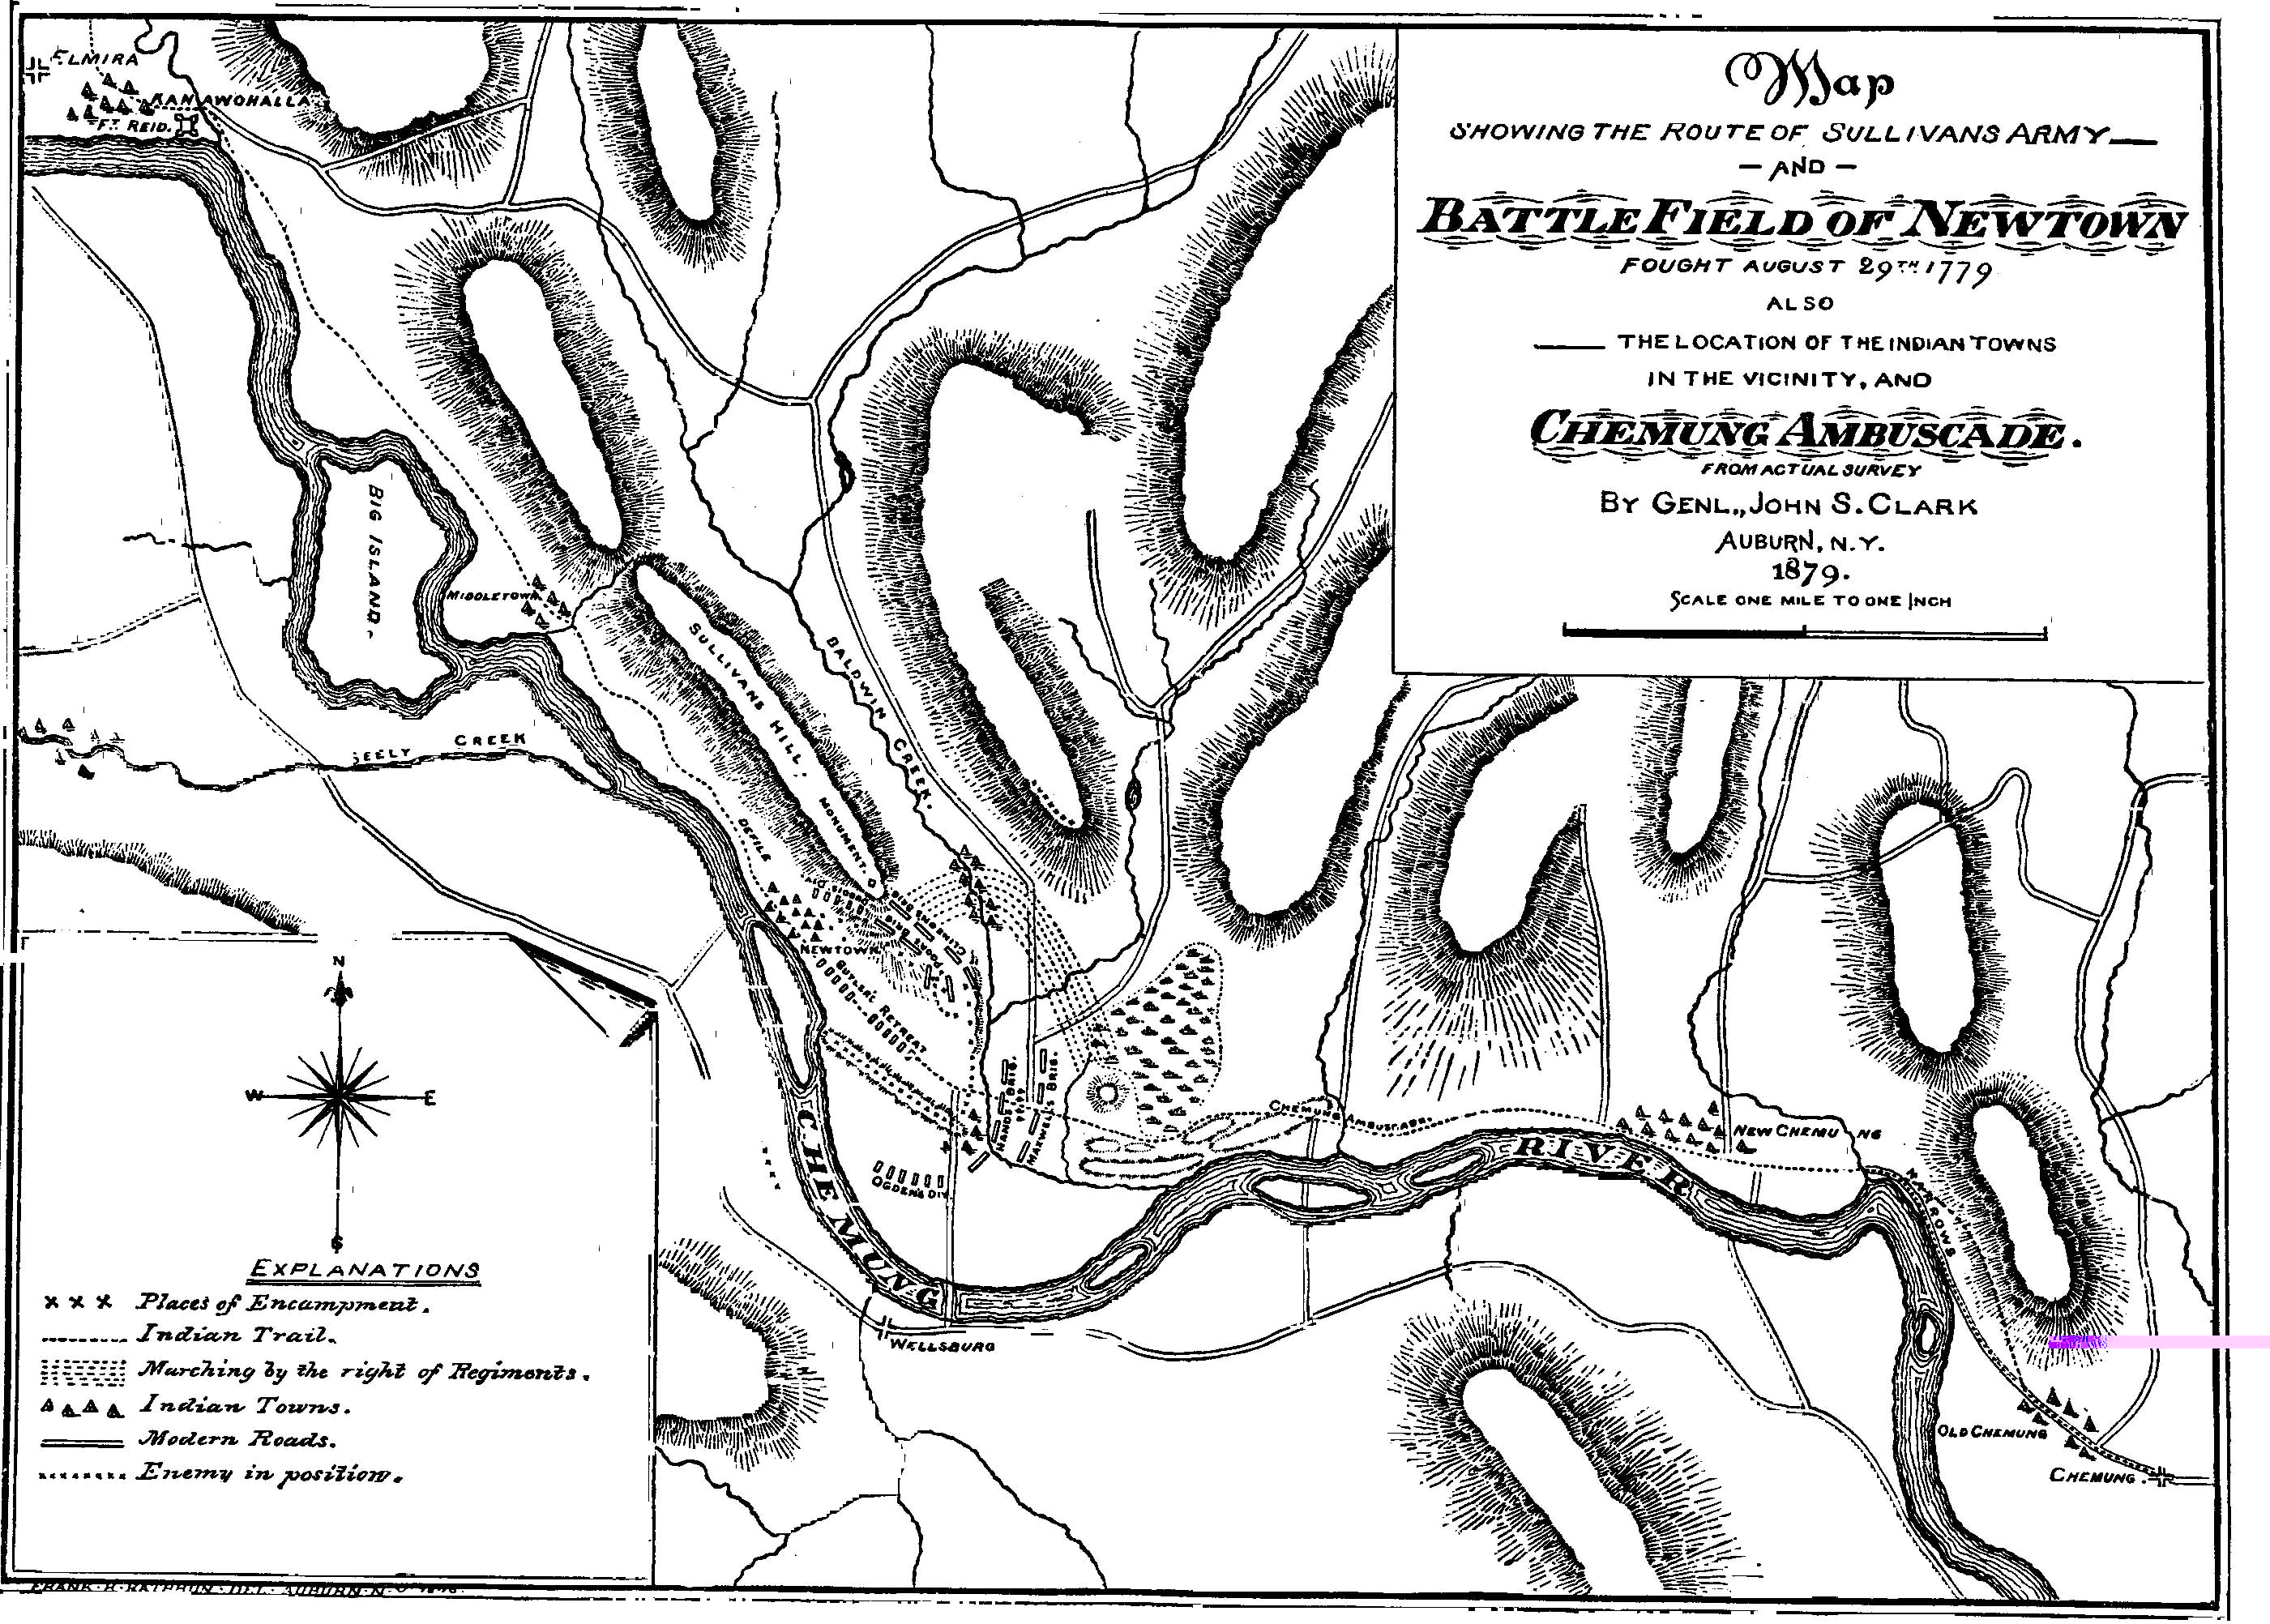 Map showing the route of Sullivan's army in the vicinity of the Battle of Newtown, August 29, 1779.